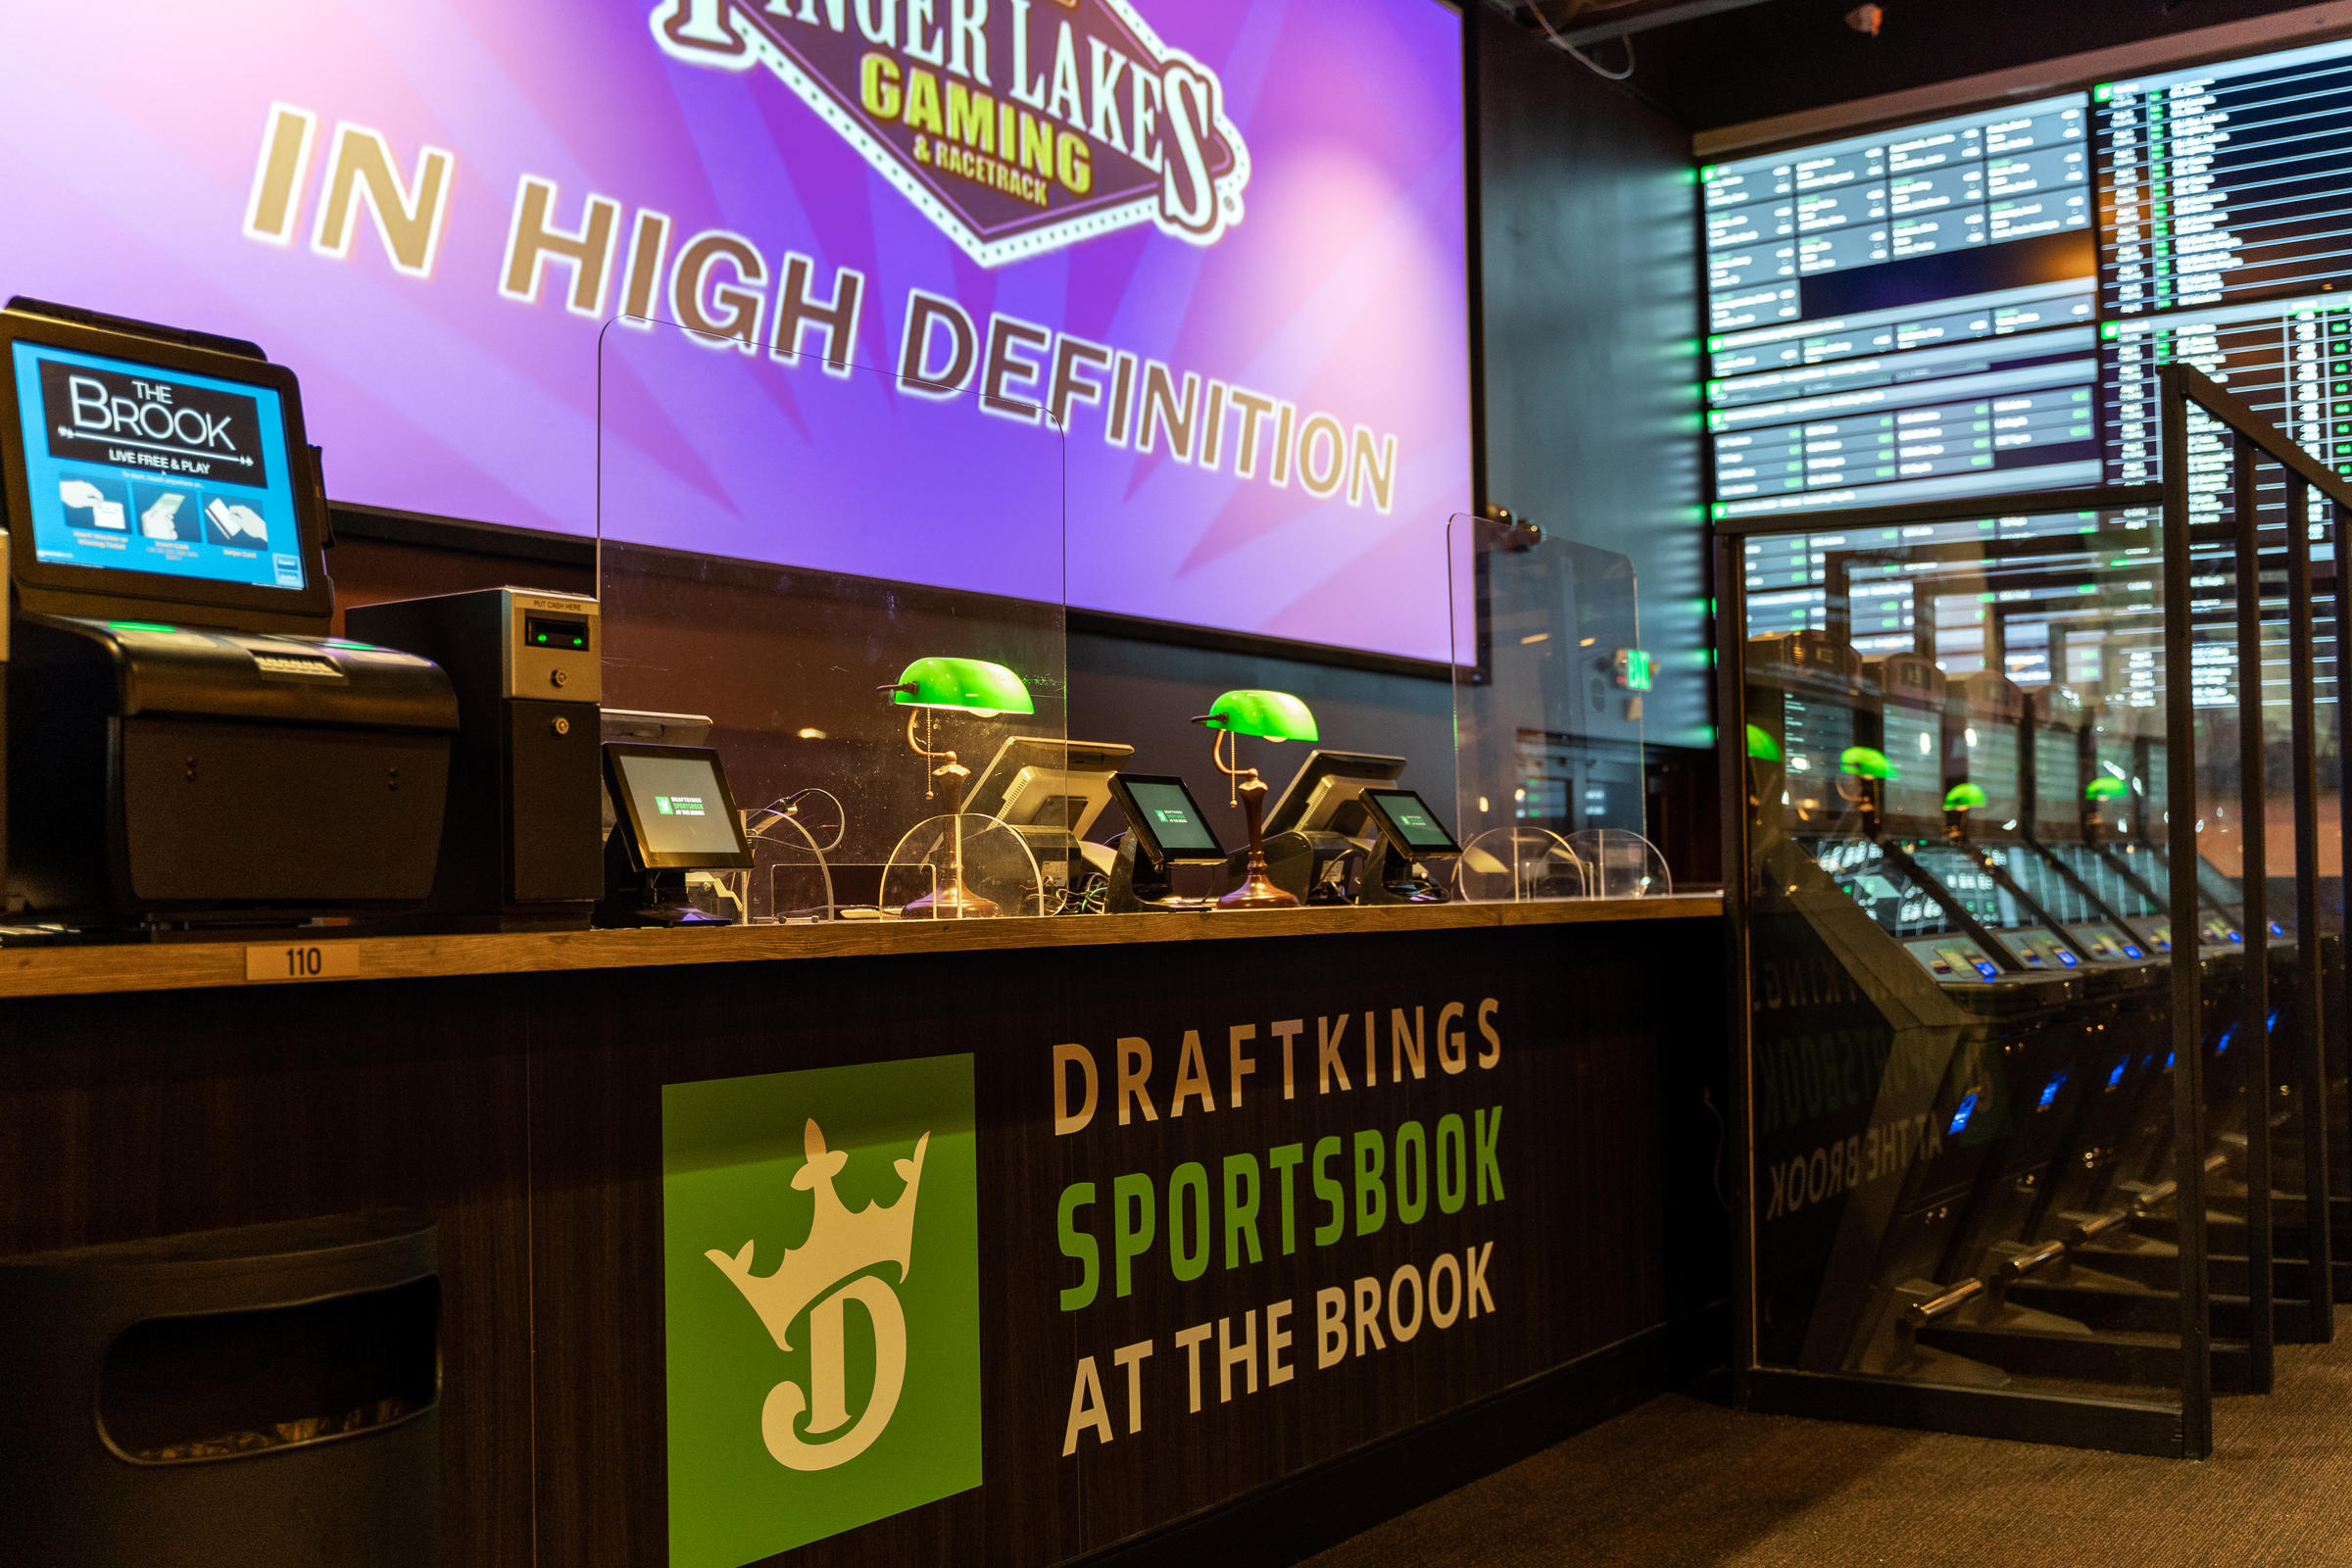 DraftKings will be a likely beneficiary if latest sports betting bills pass.